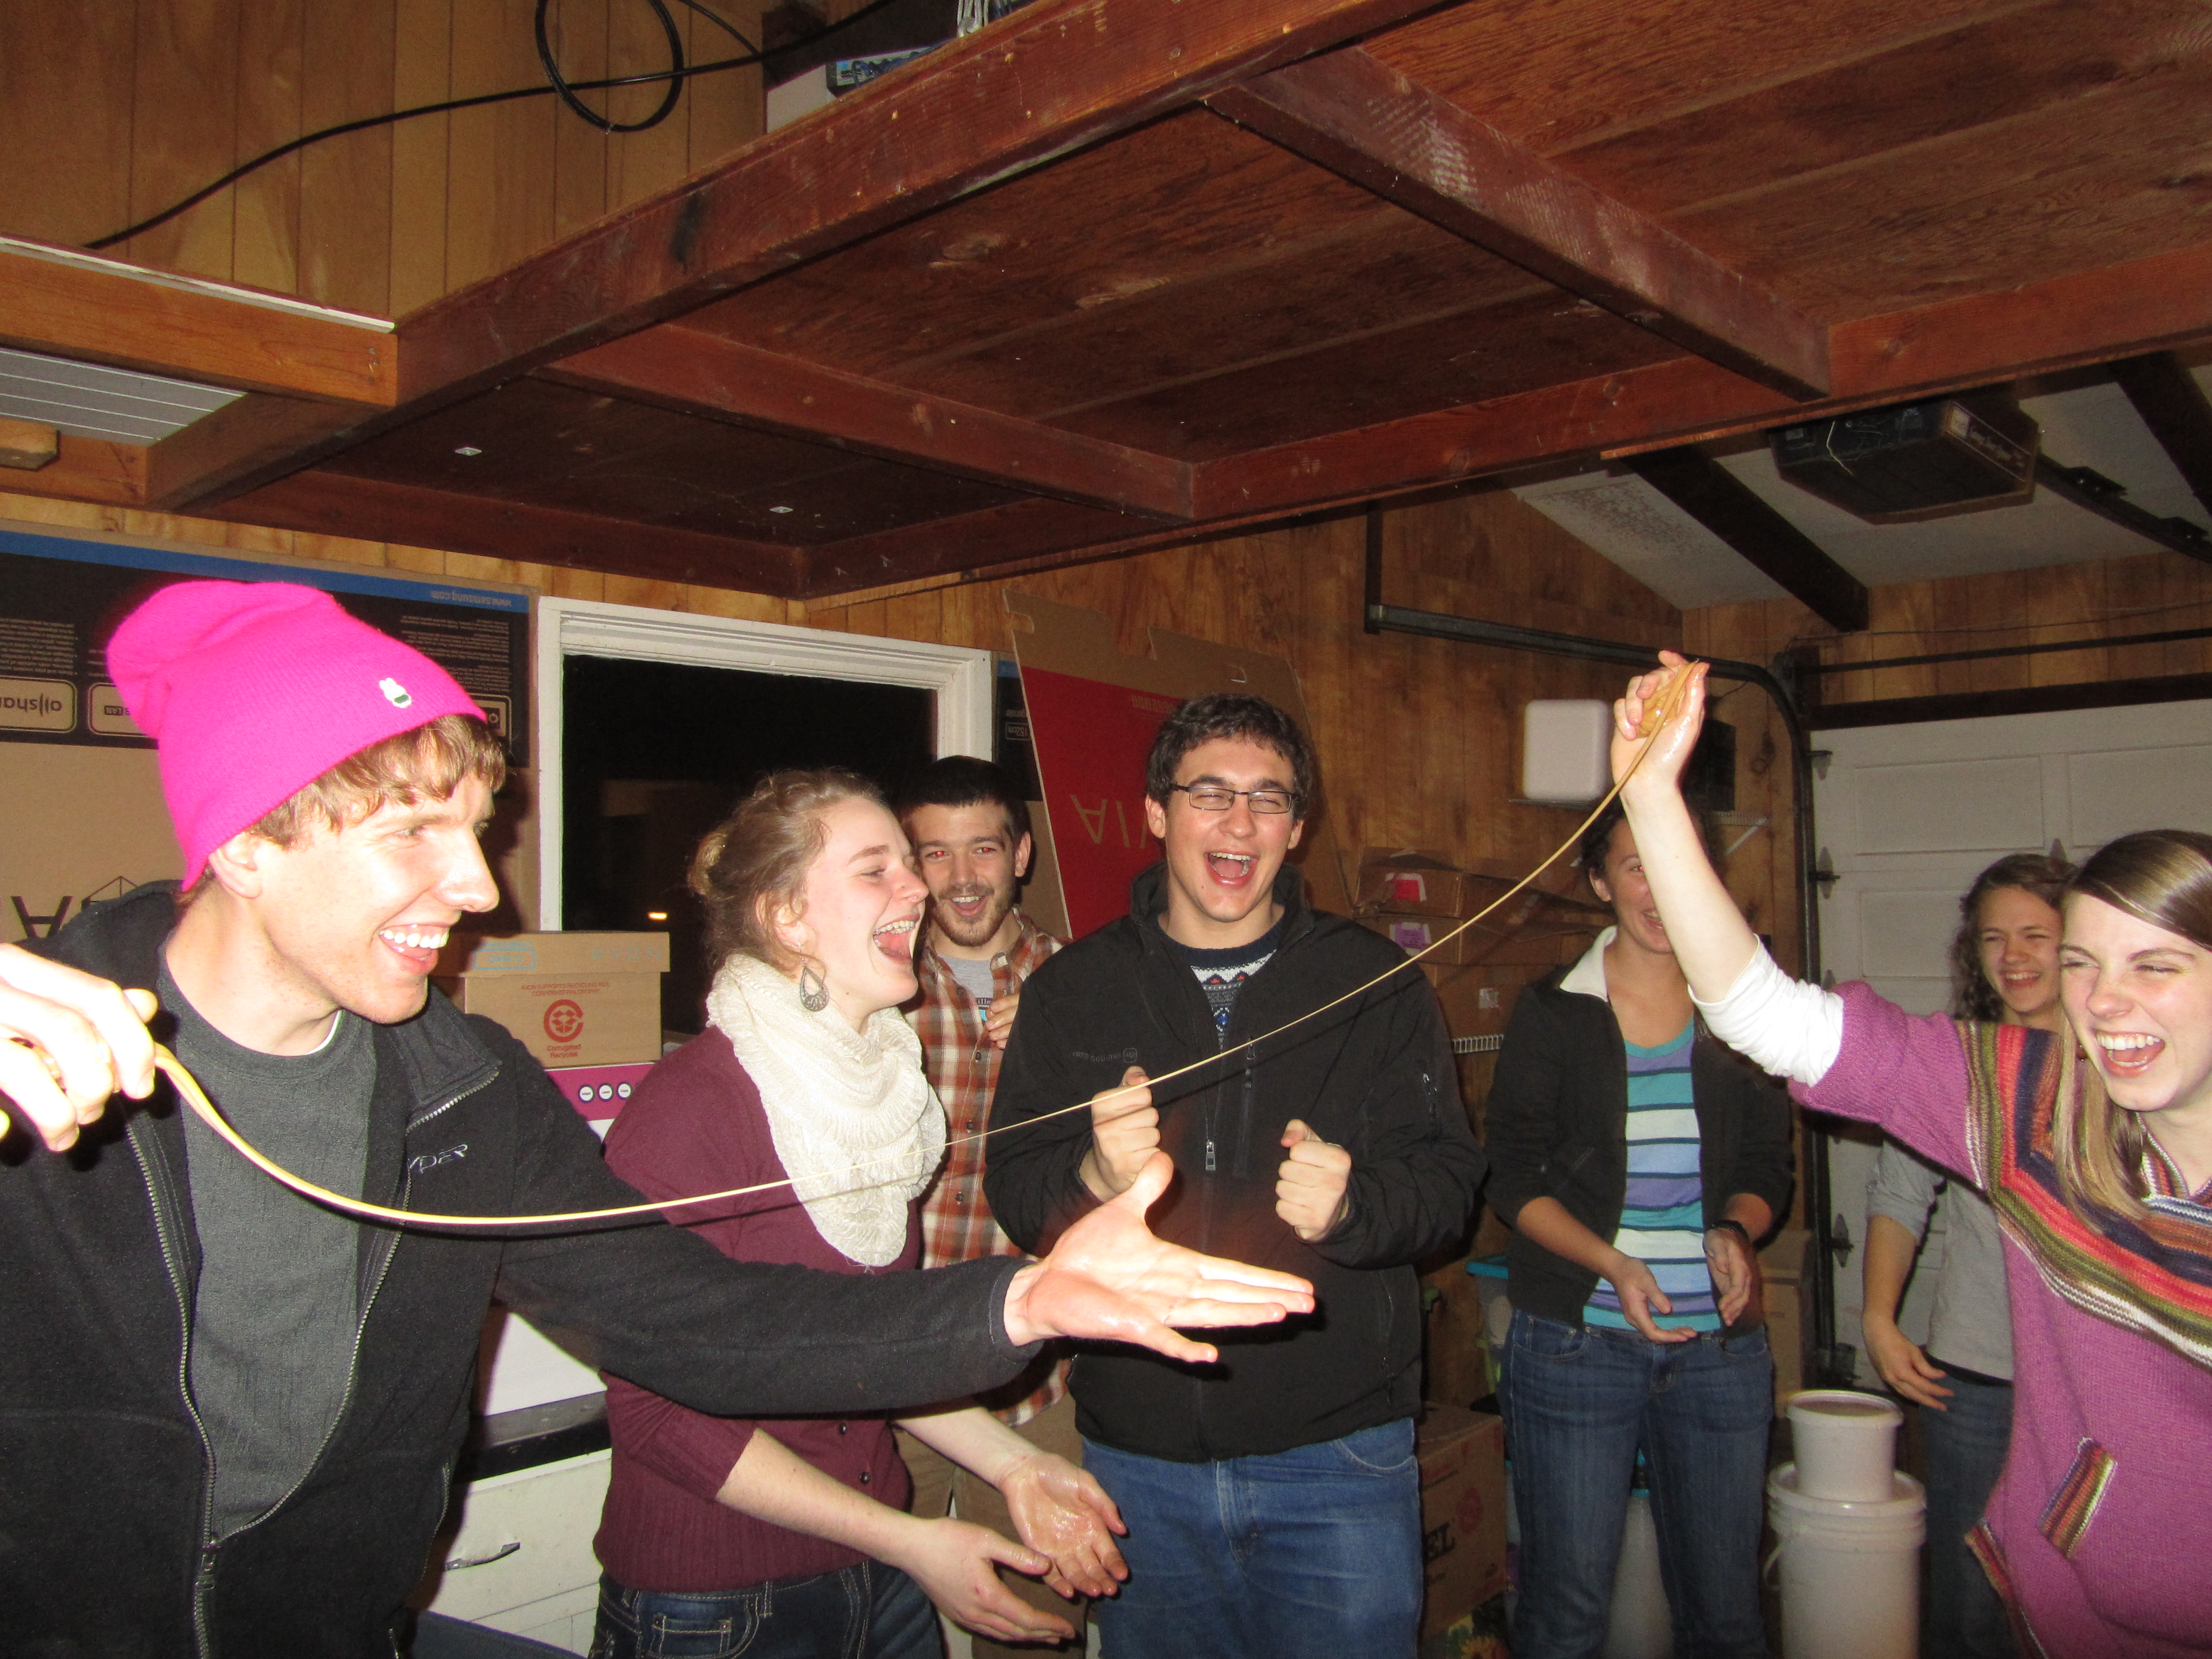 Seven students participate in a campus taffy pull at Vita House. Two students pull a taffy while the others cheer them on